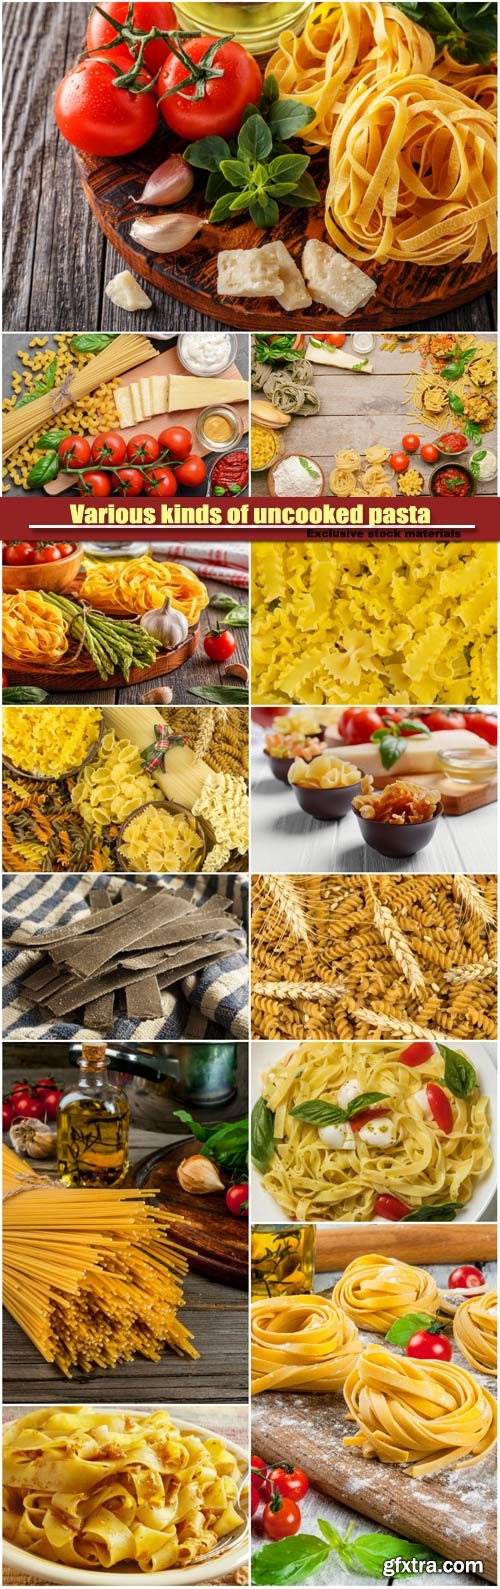 Various kinds of uncooked pasta